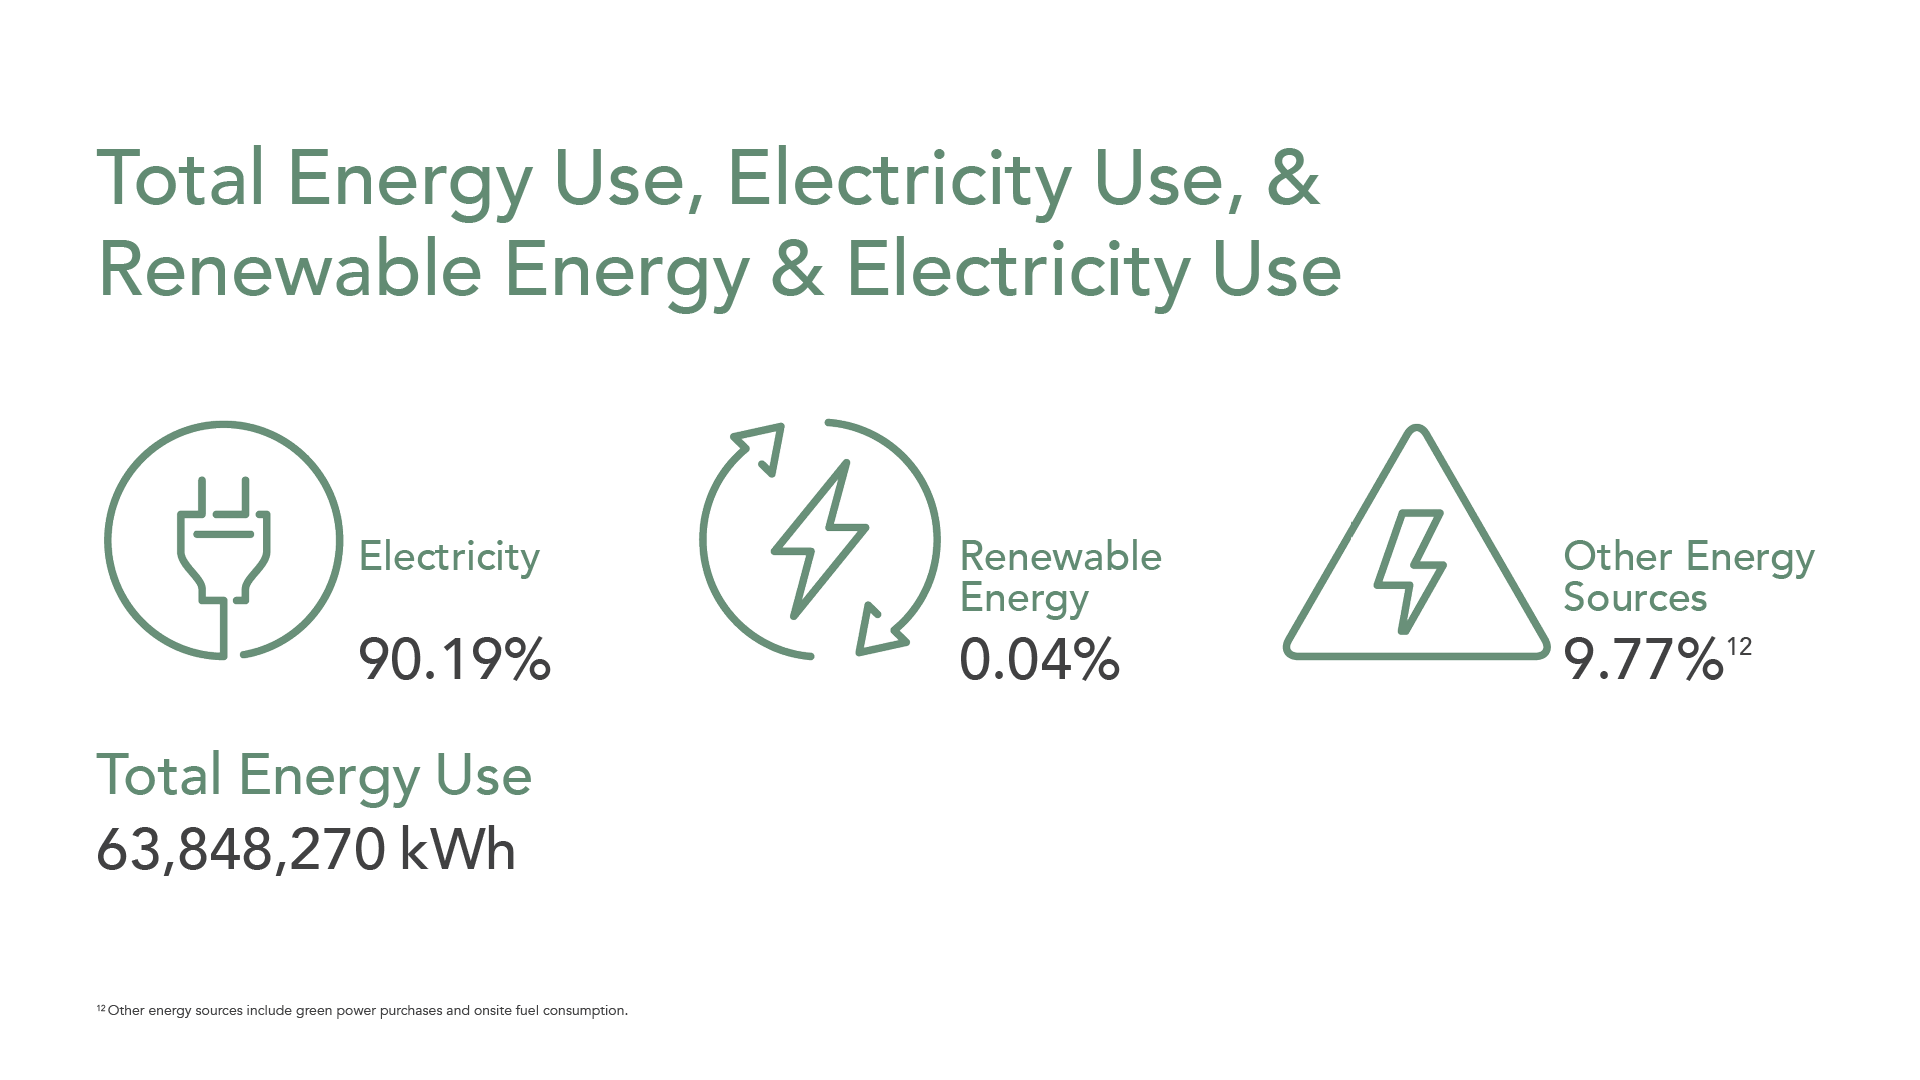 Informational Graphic that reads: Total Energy Use, Electricity Use, and Renewable Energy and Electricity Use. Electricity is 90.19%, renewable energy is 0.04%, and other energy sources is 9.77% (footnote reads other energy sources include green power purchases and onsite fuel consumption). Total Energy Use is 63,848,270 kWh.